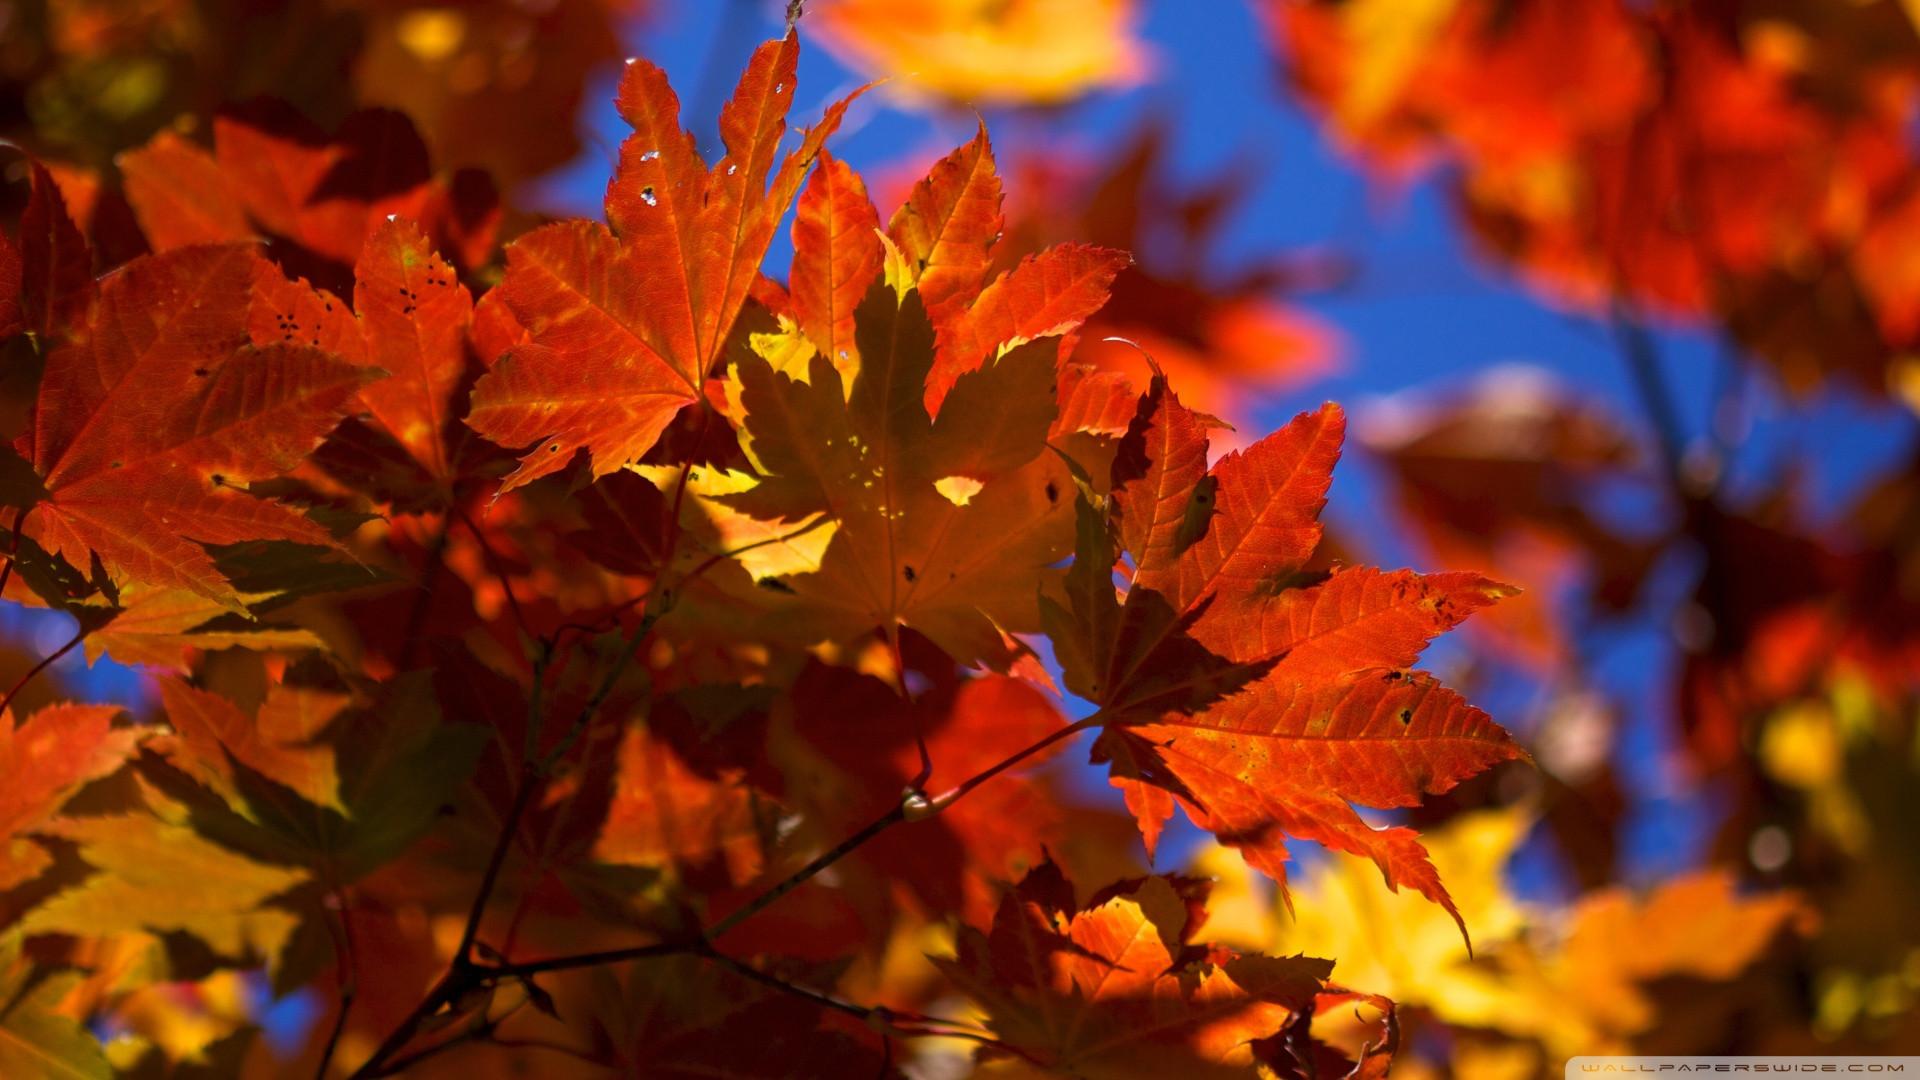 Fall Leaves Wallpaper Desktop background picture